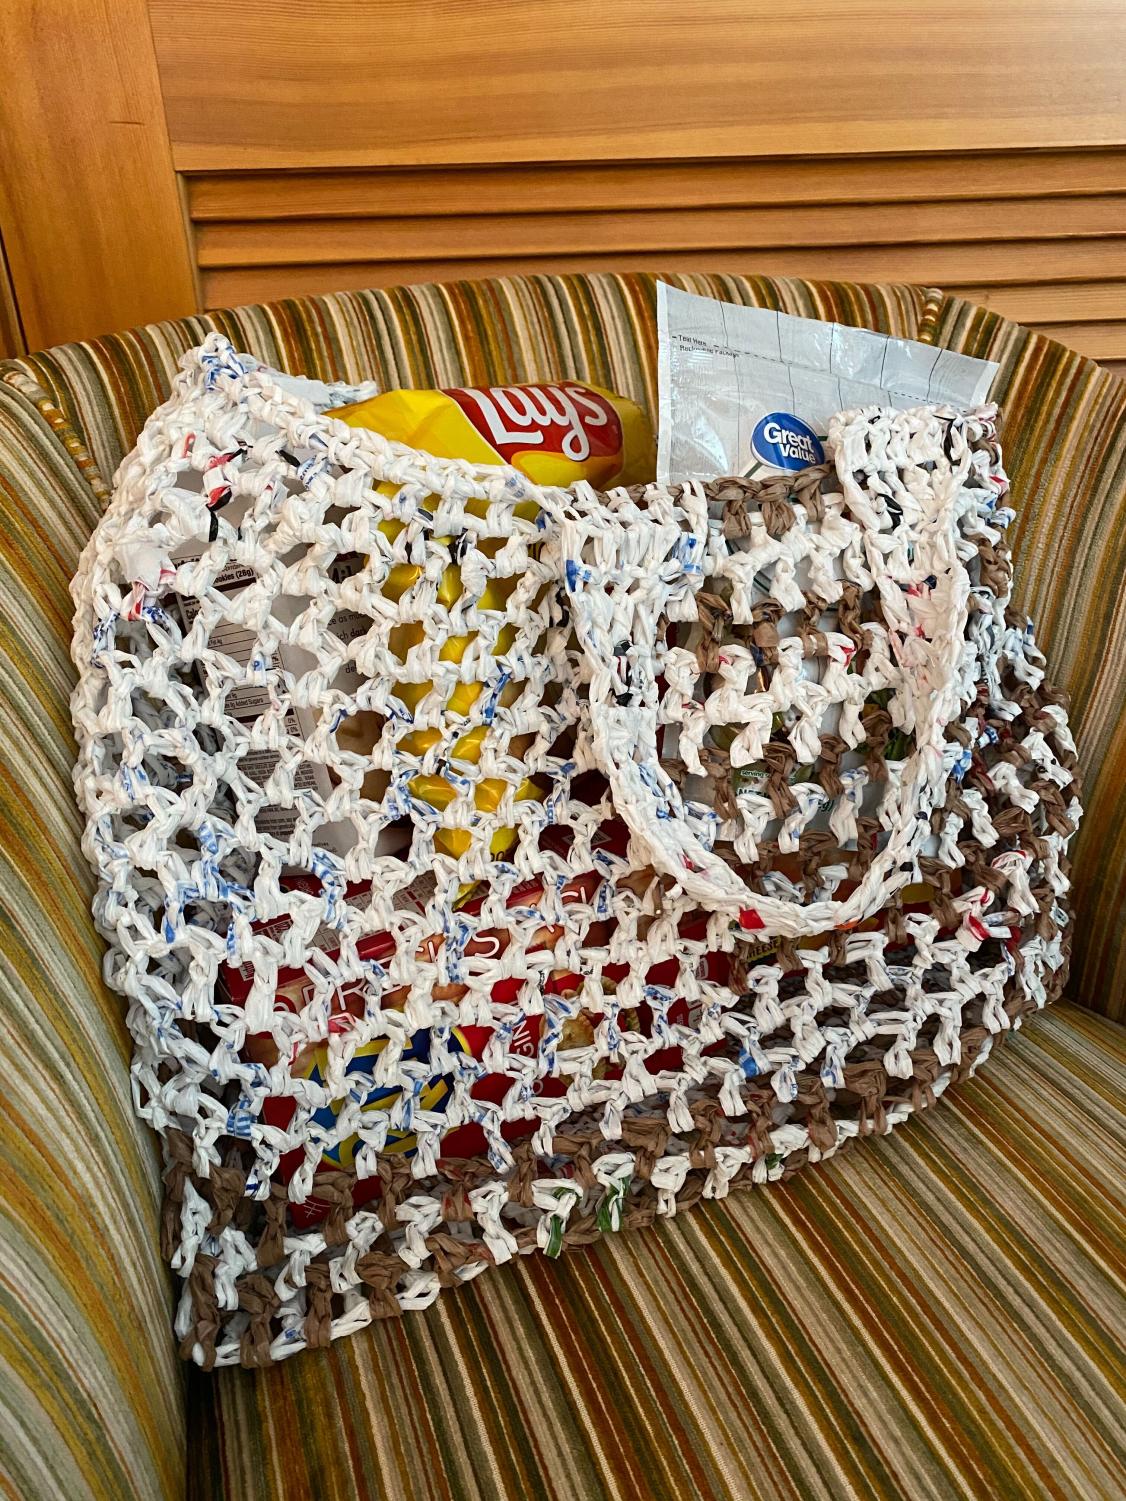 How to Make a Tote Bag out of Plastic Bags 